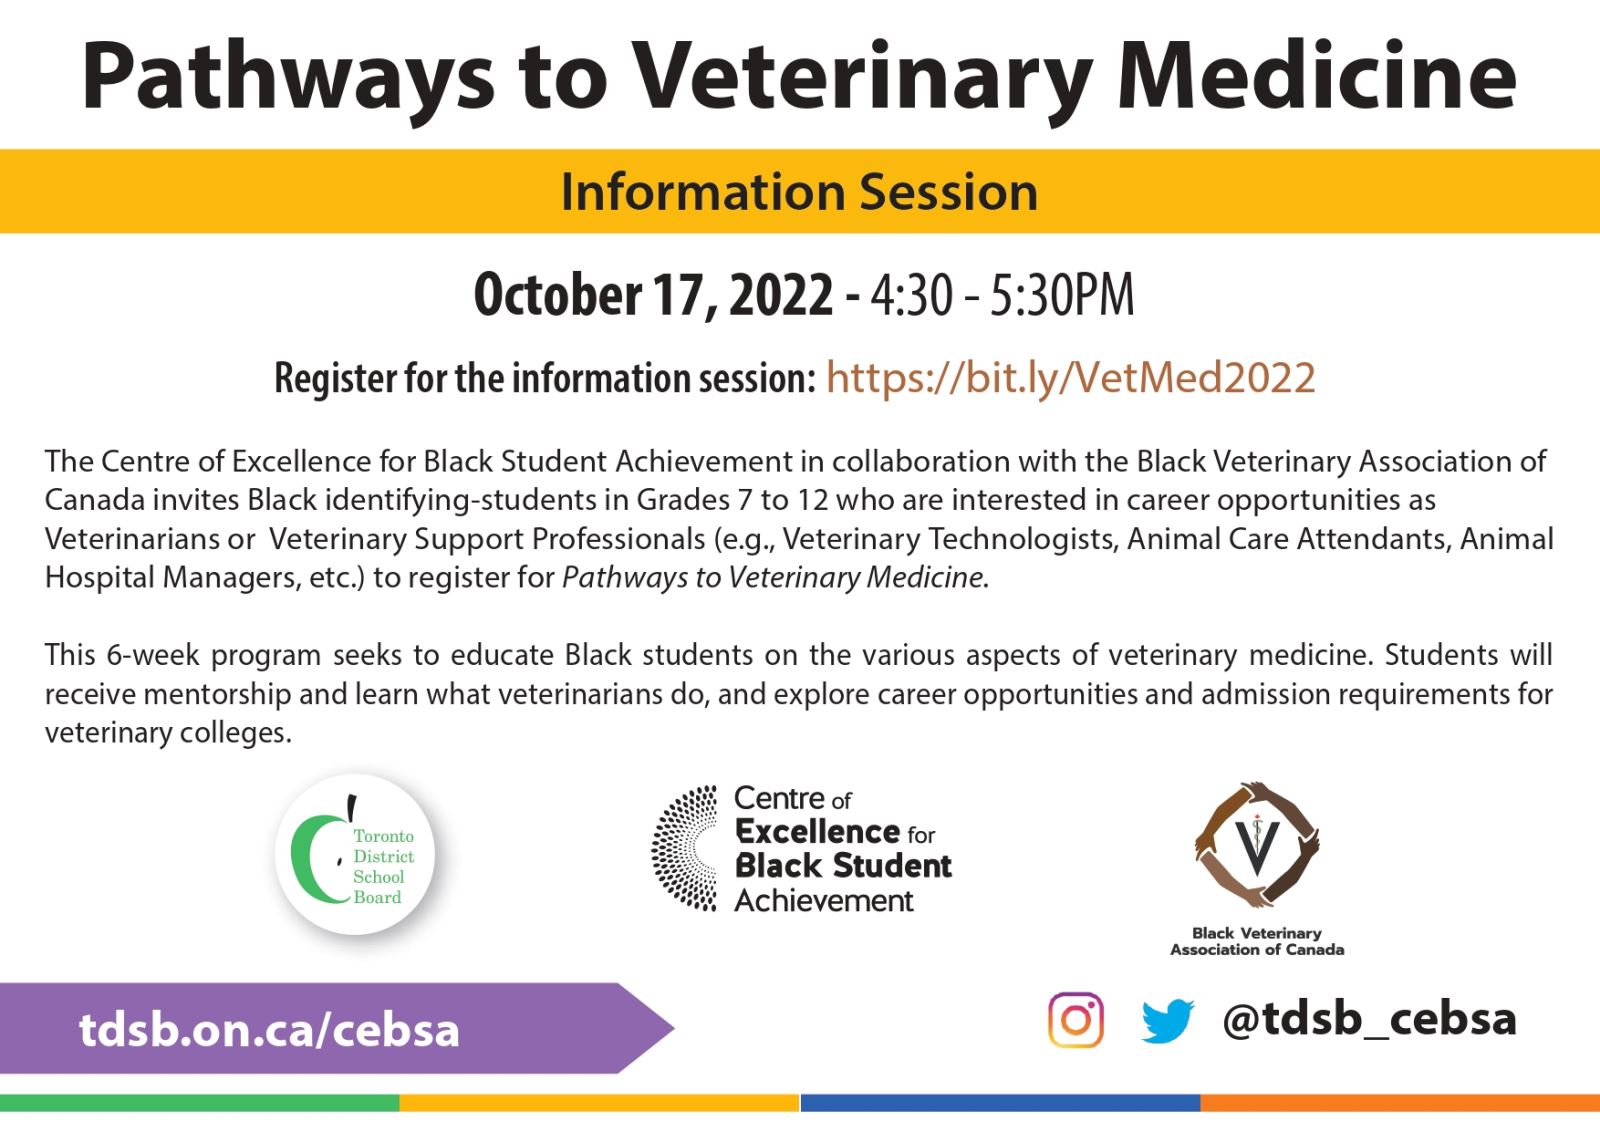 Pathways to veterinary medicine info-session is on 17th October, 2022 from 4:30 pm to 5:30 pm